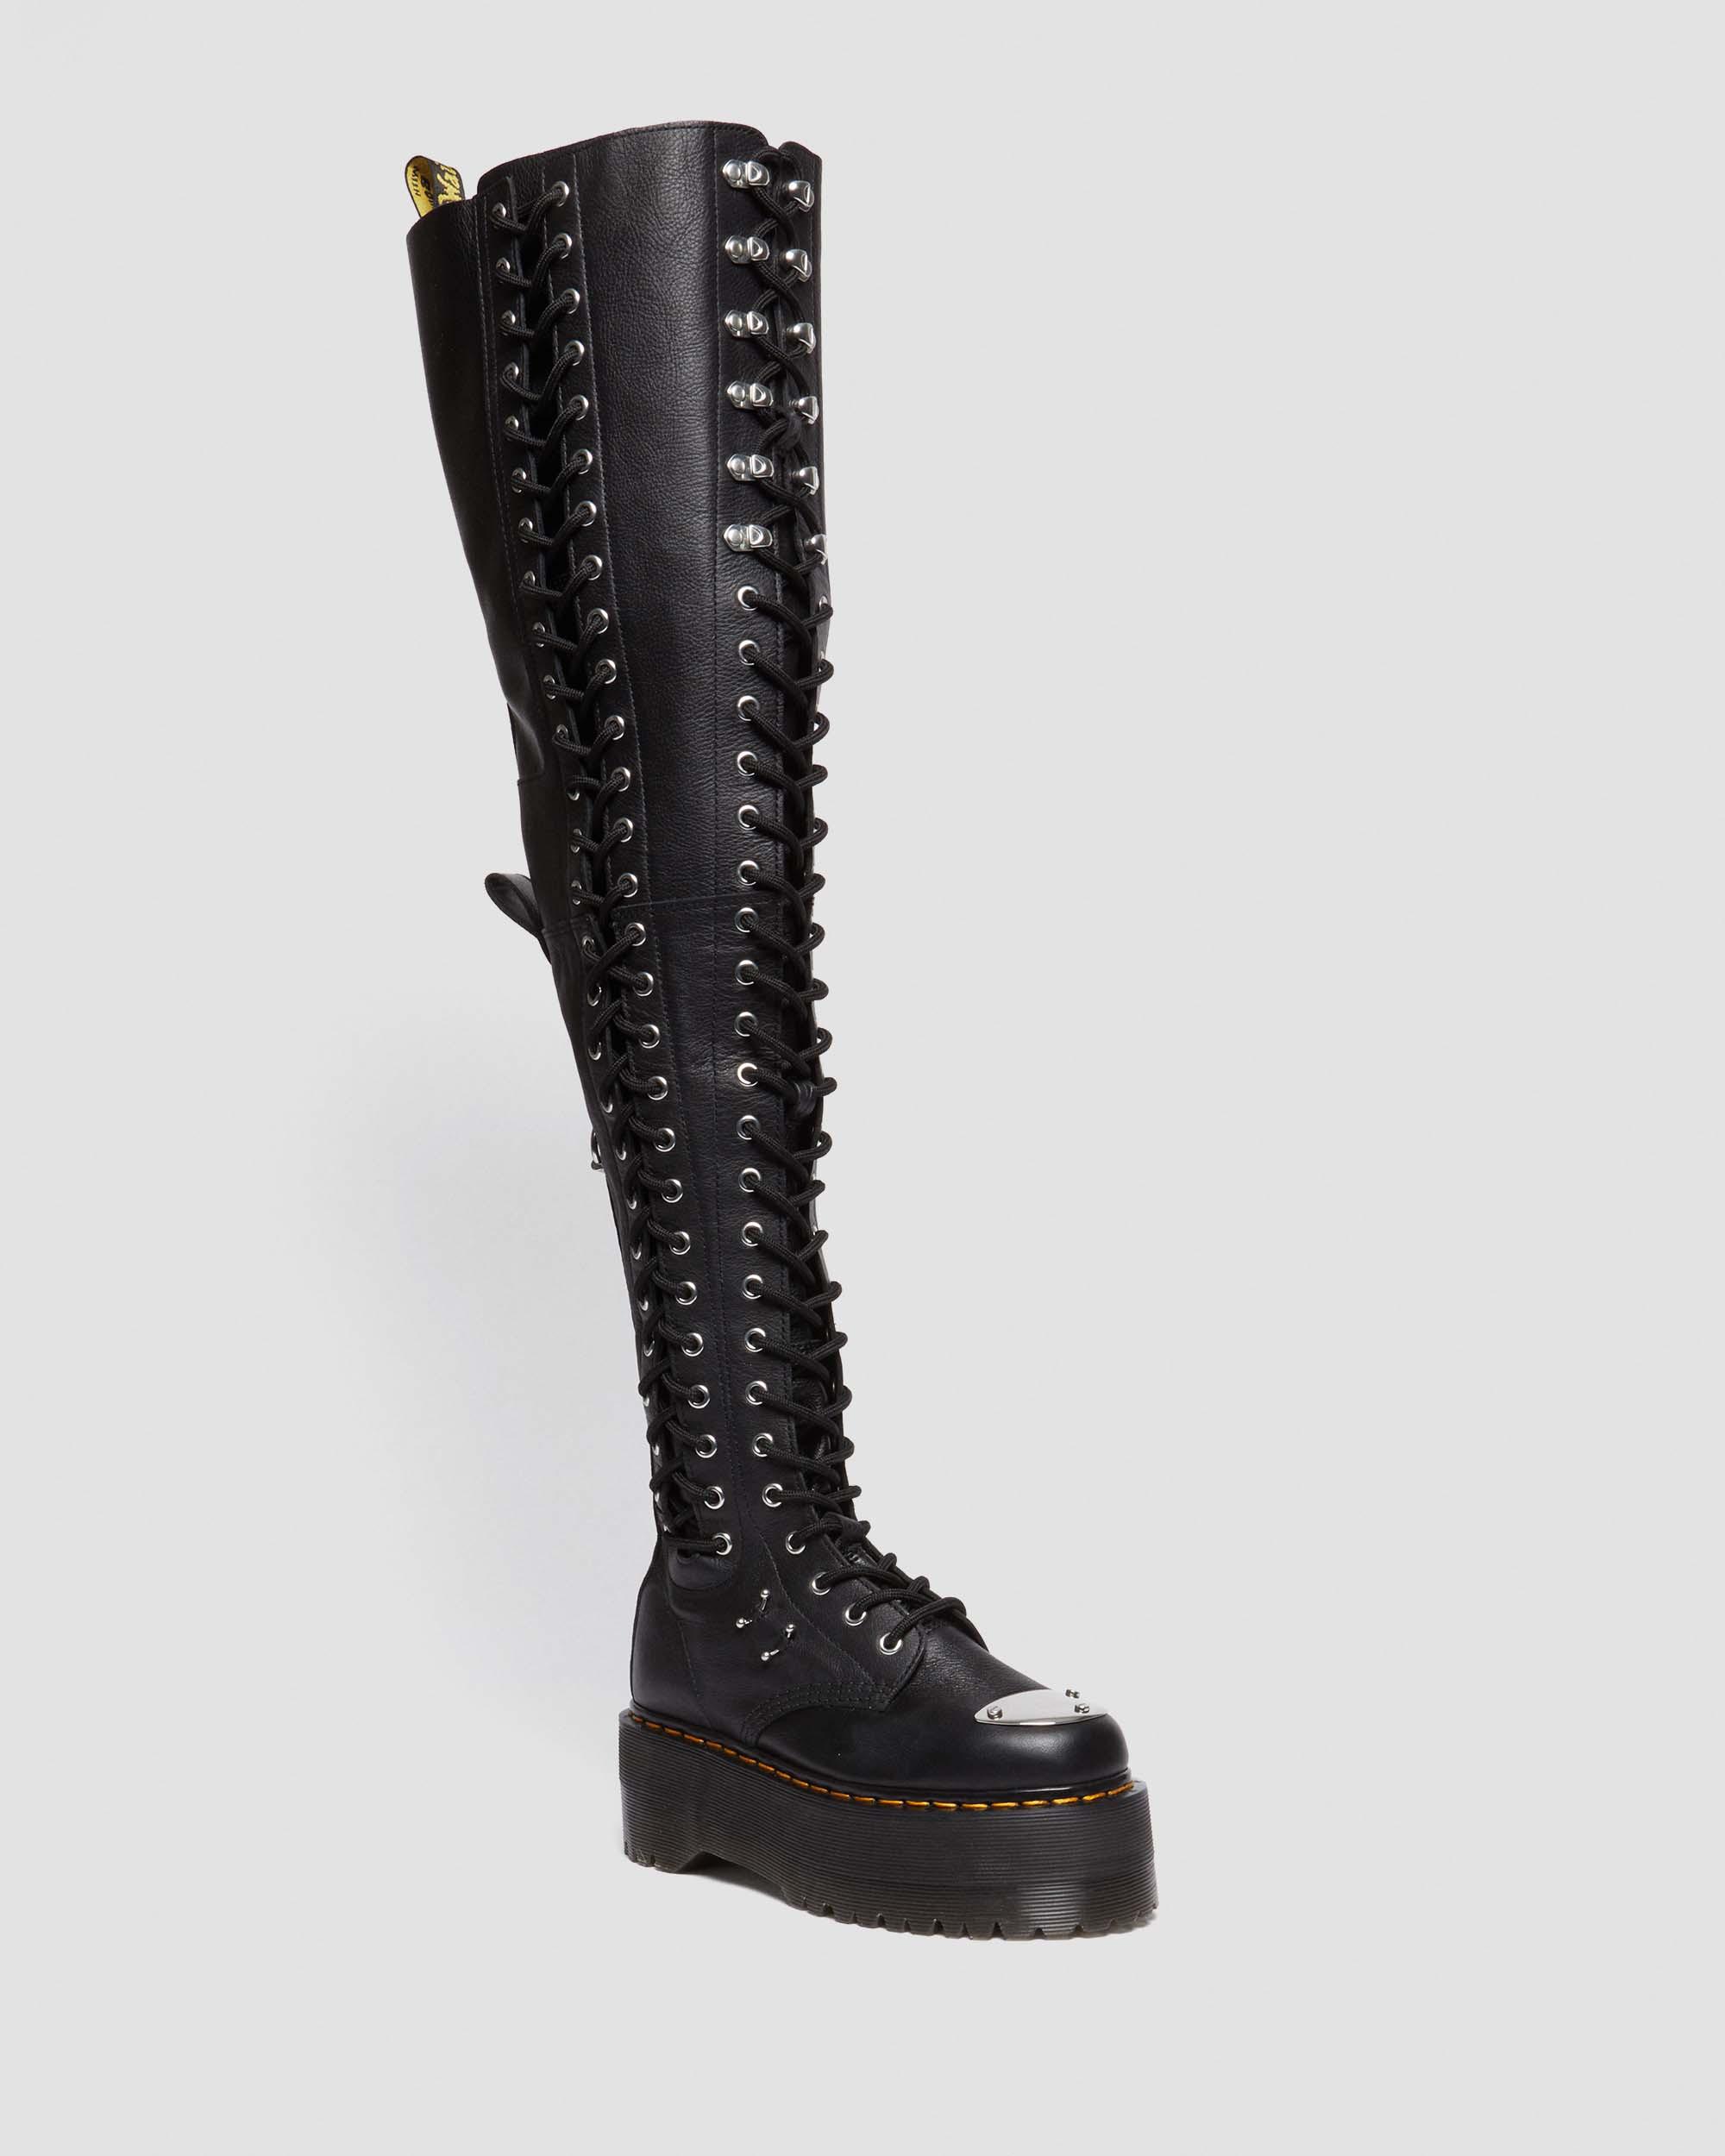 Tall knee high boots for men?